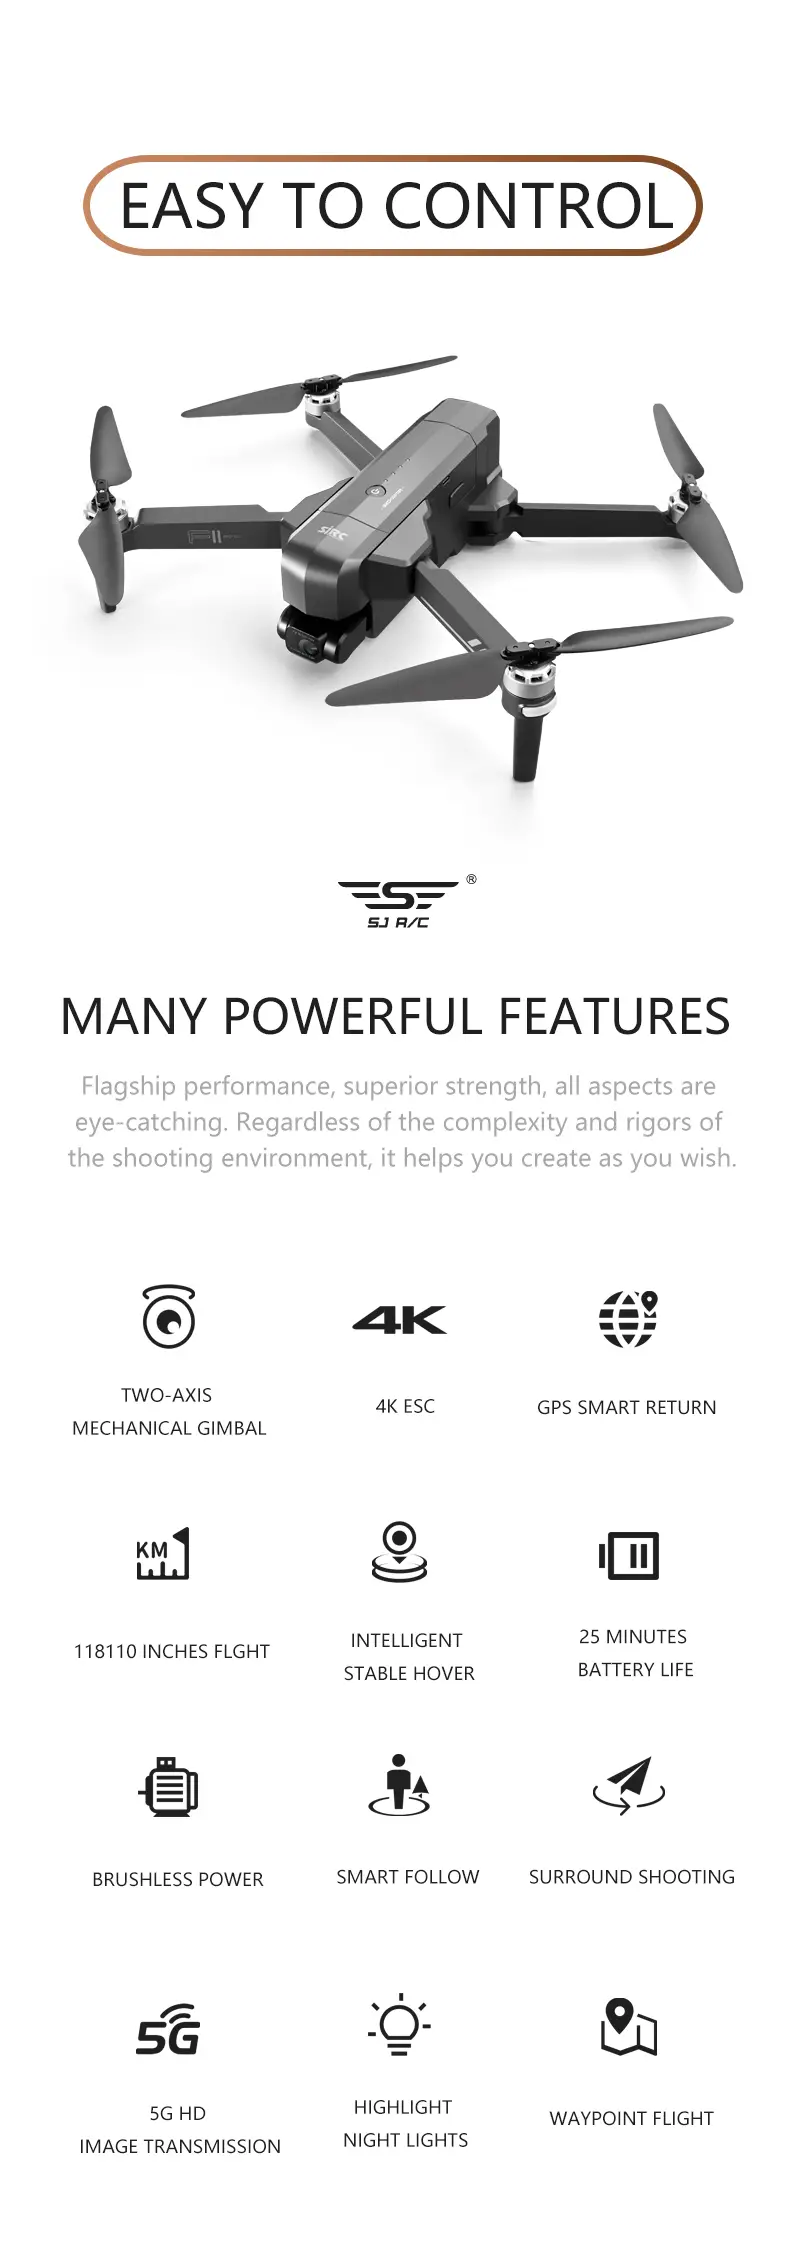 capture spectacular 4k footage with this advanced drone 2 axis gimbal 5g image transmission gps return brushless power smart follow waypoint flight gesture photography details 2